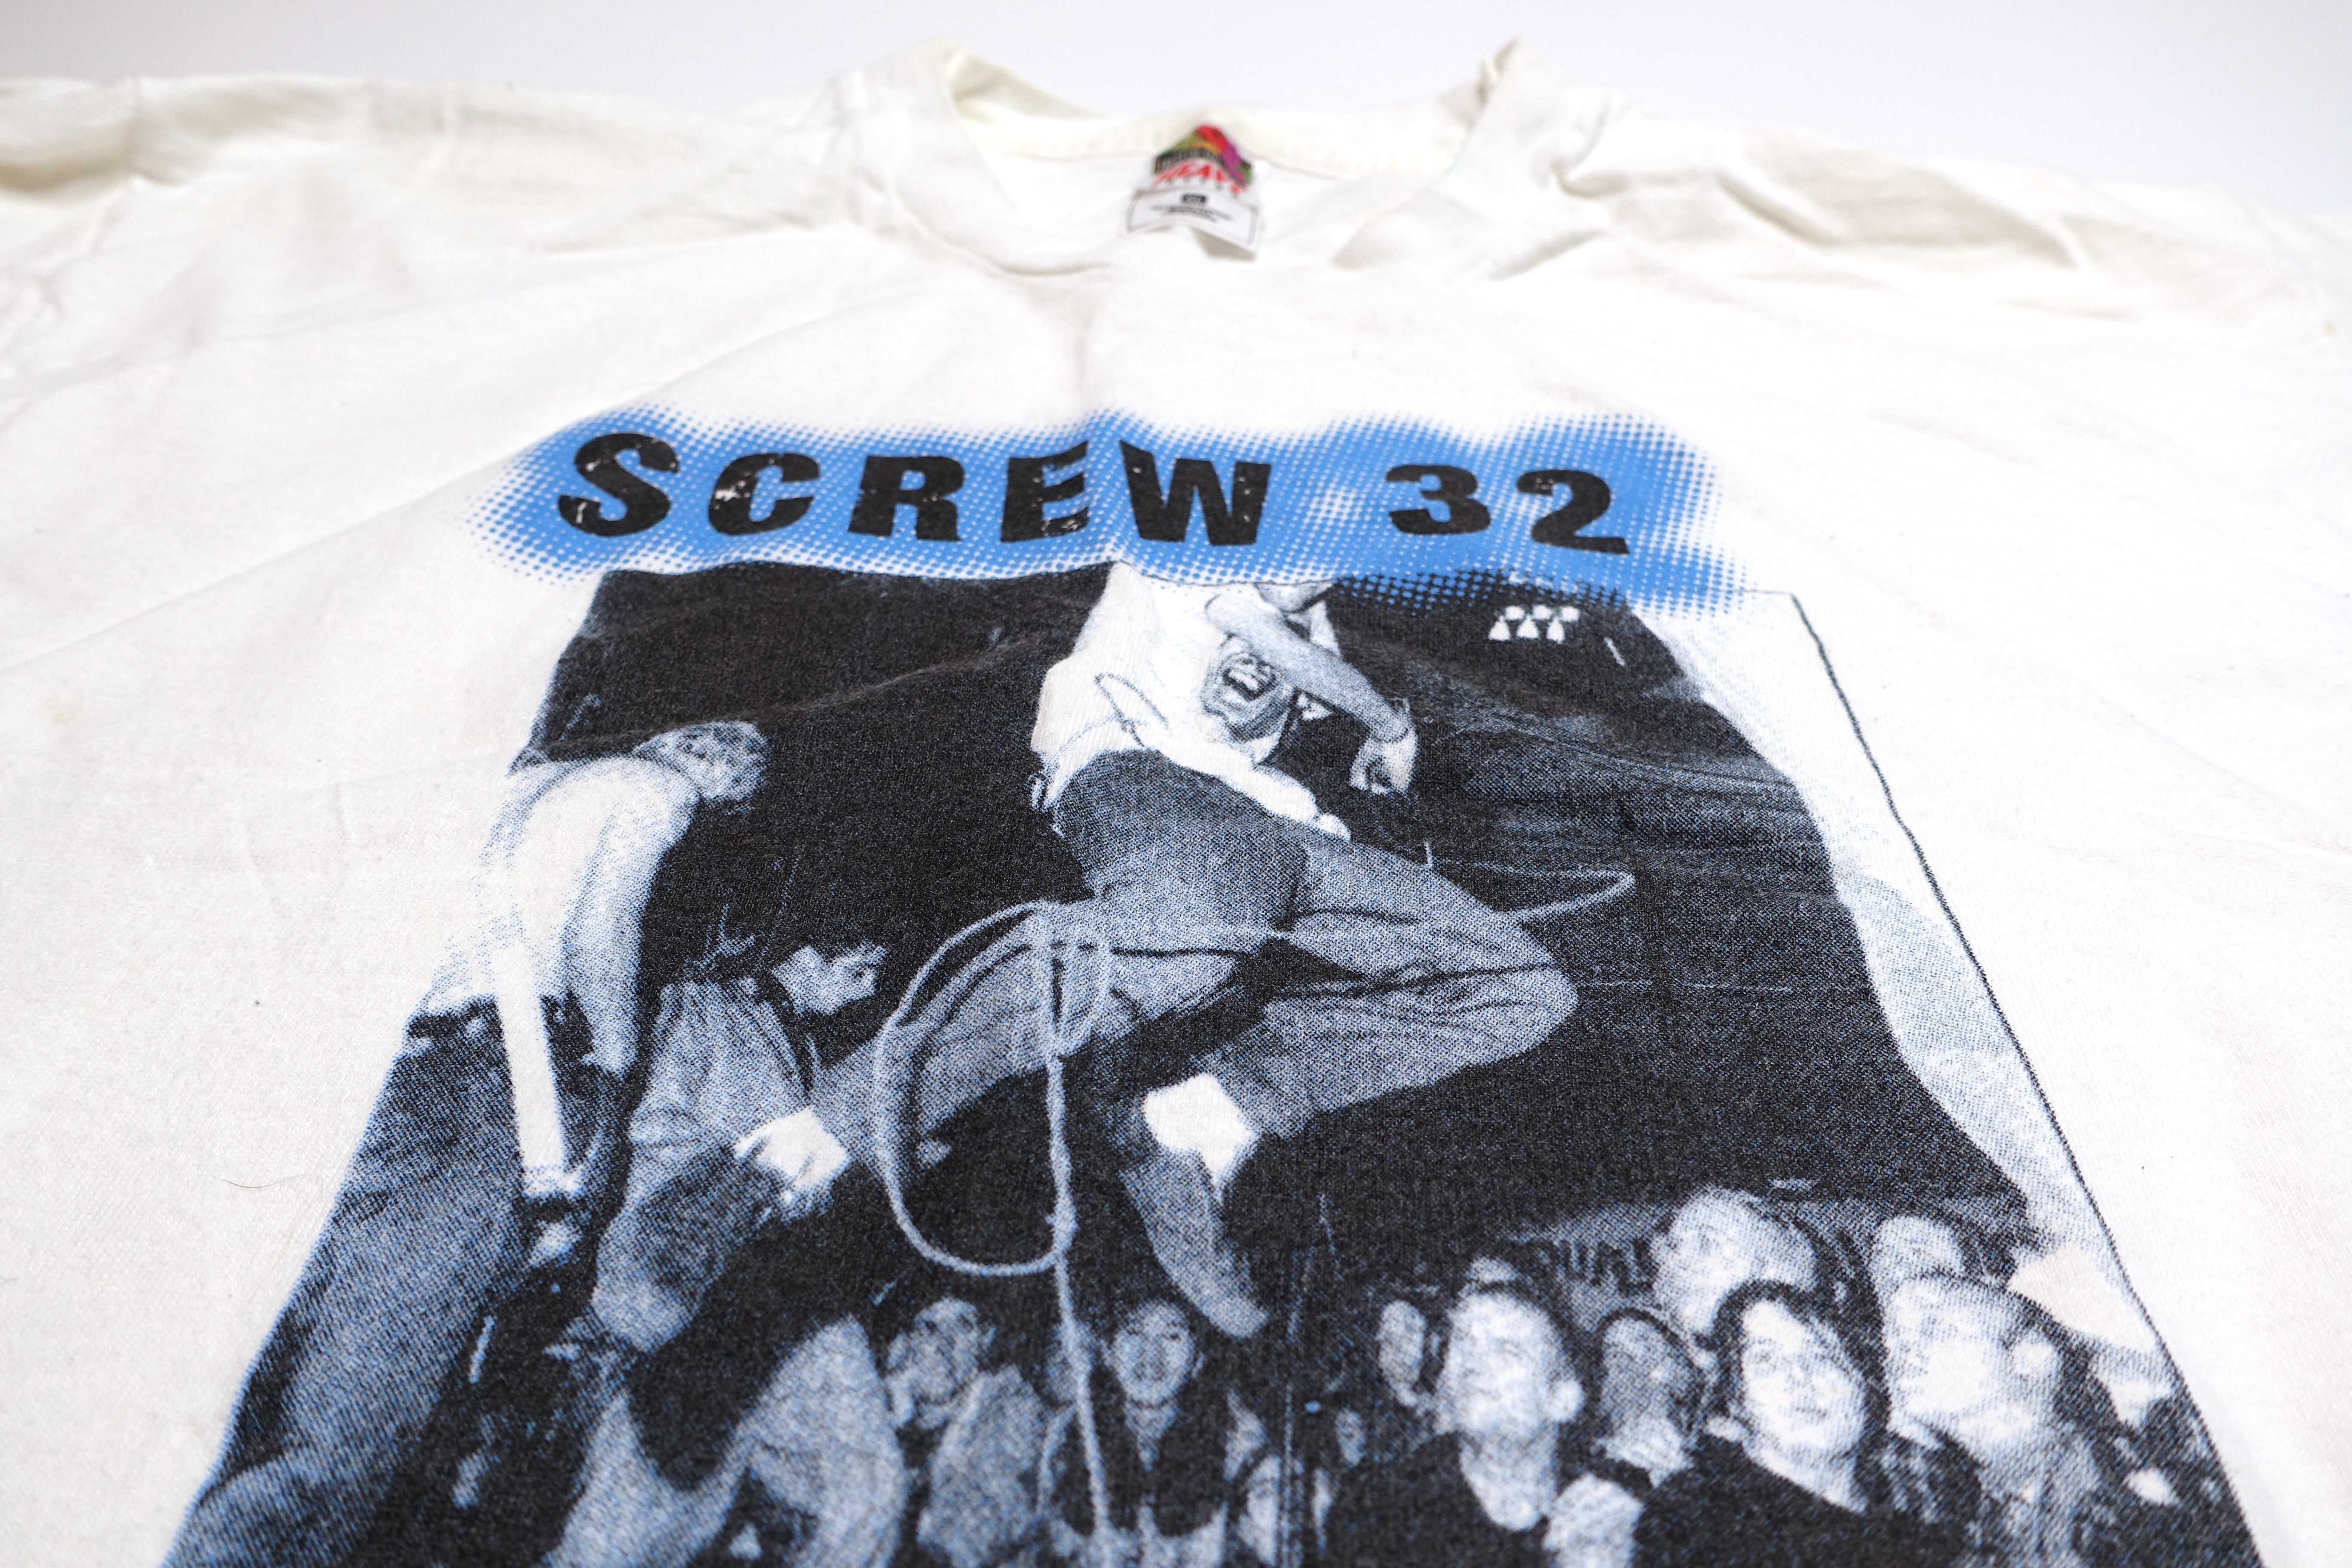 Screw 32 ‎– Unresolved Childhood Issues 1995 Tour Shirt Size XL